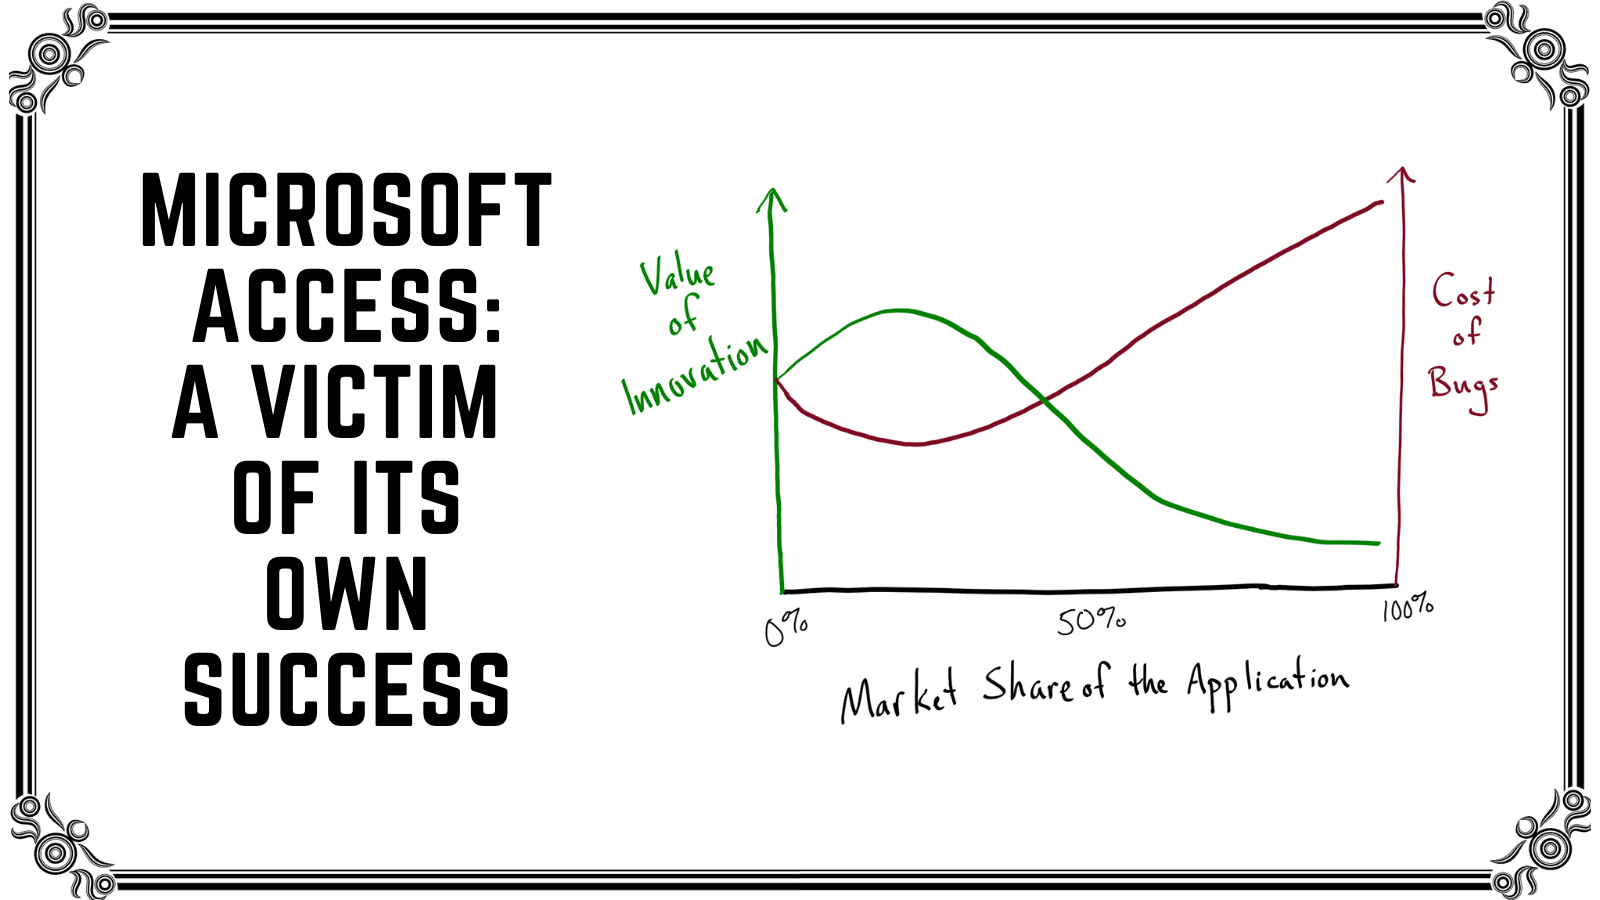 Microsoft Access: A Victim of Its Own Success